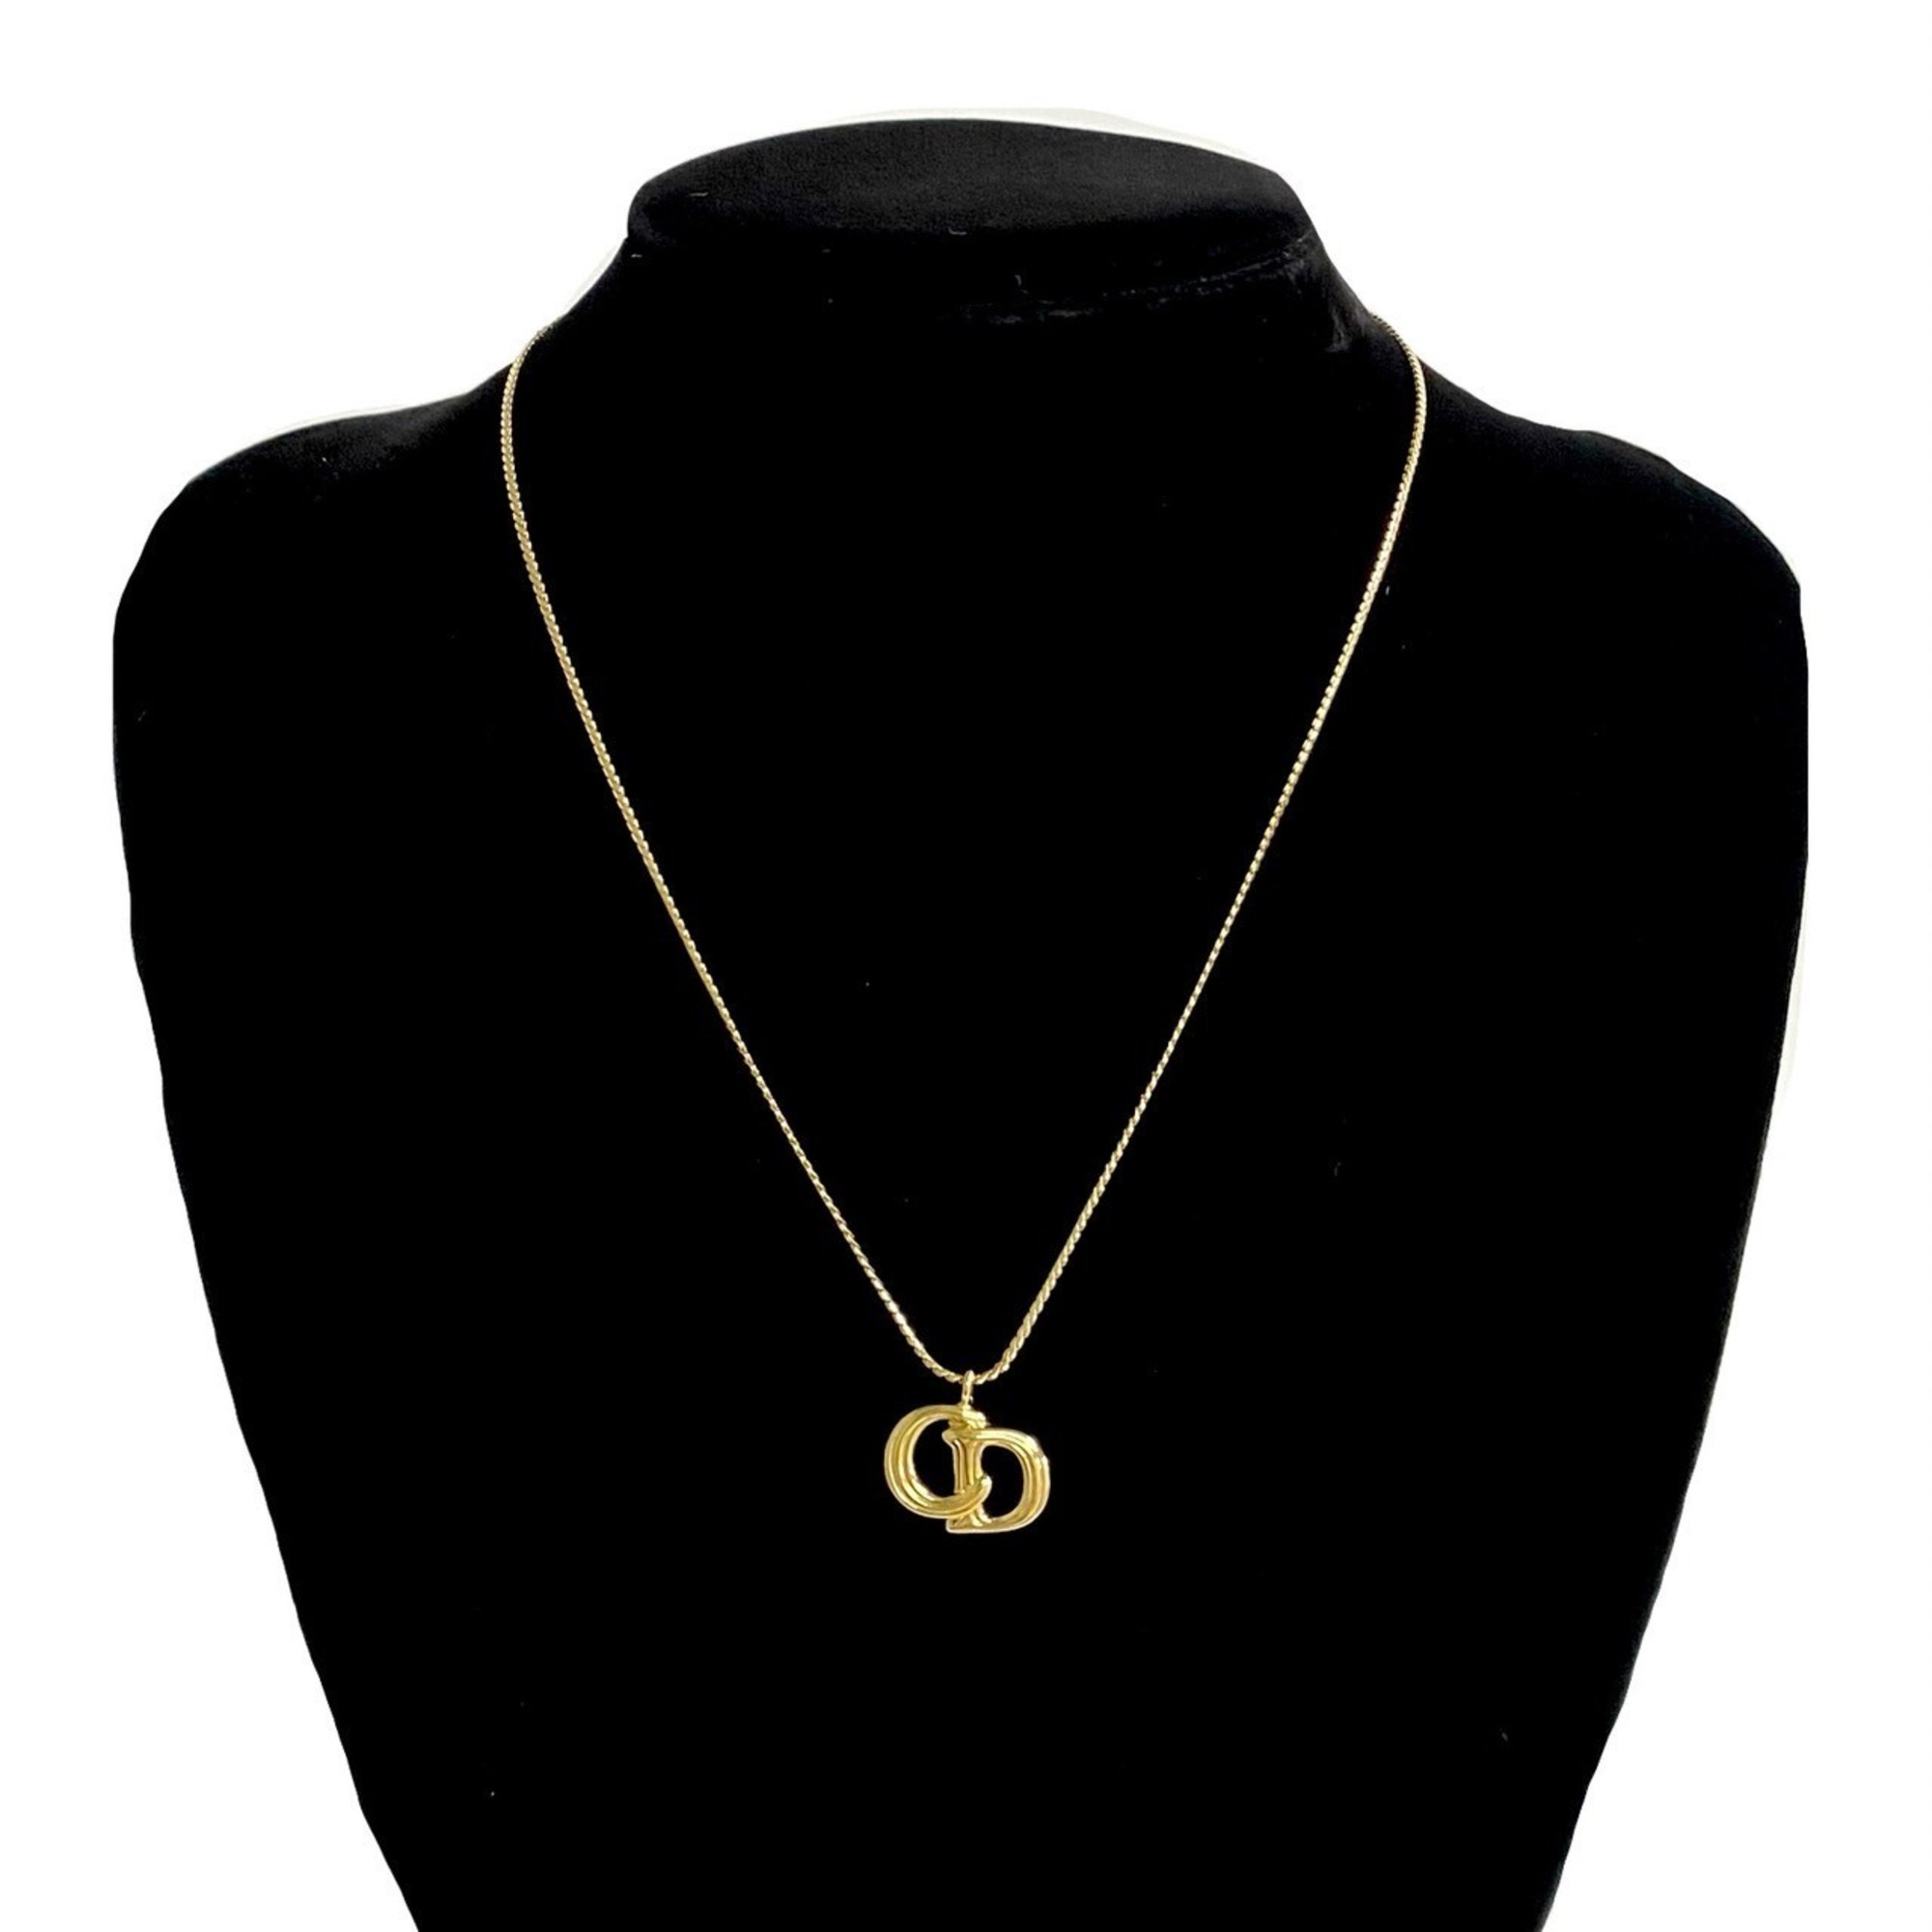 Christian Dior CD motif metal chain necklace pendant gold 25873